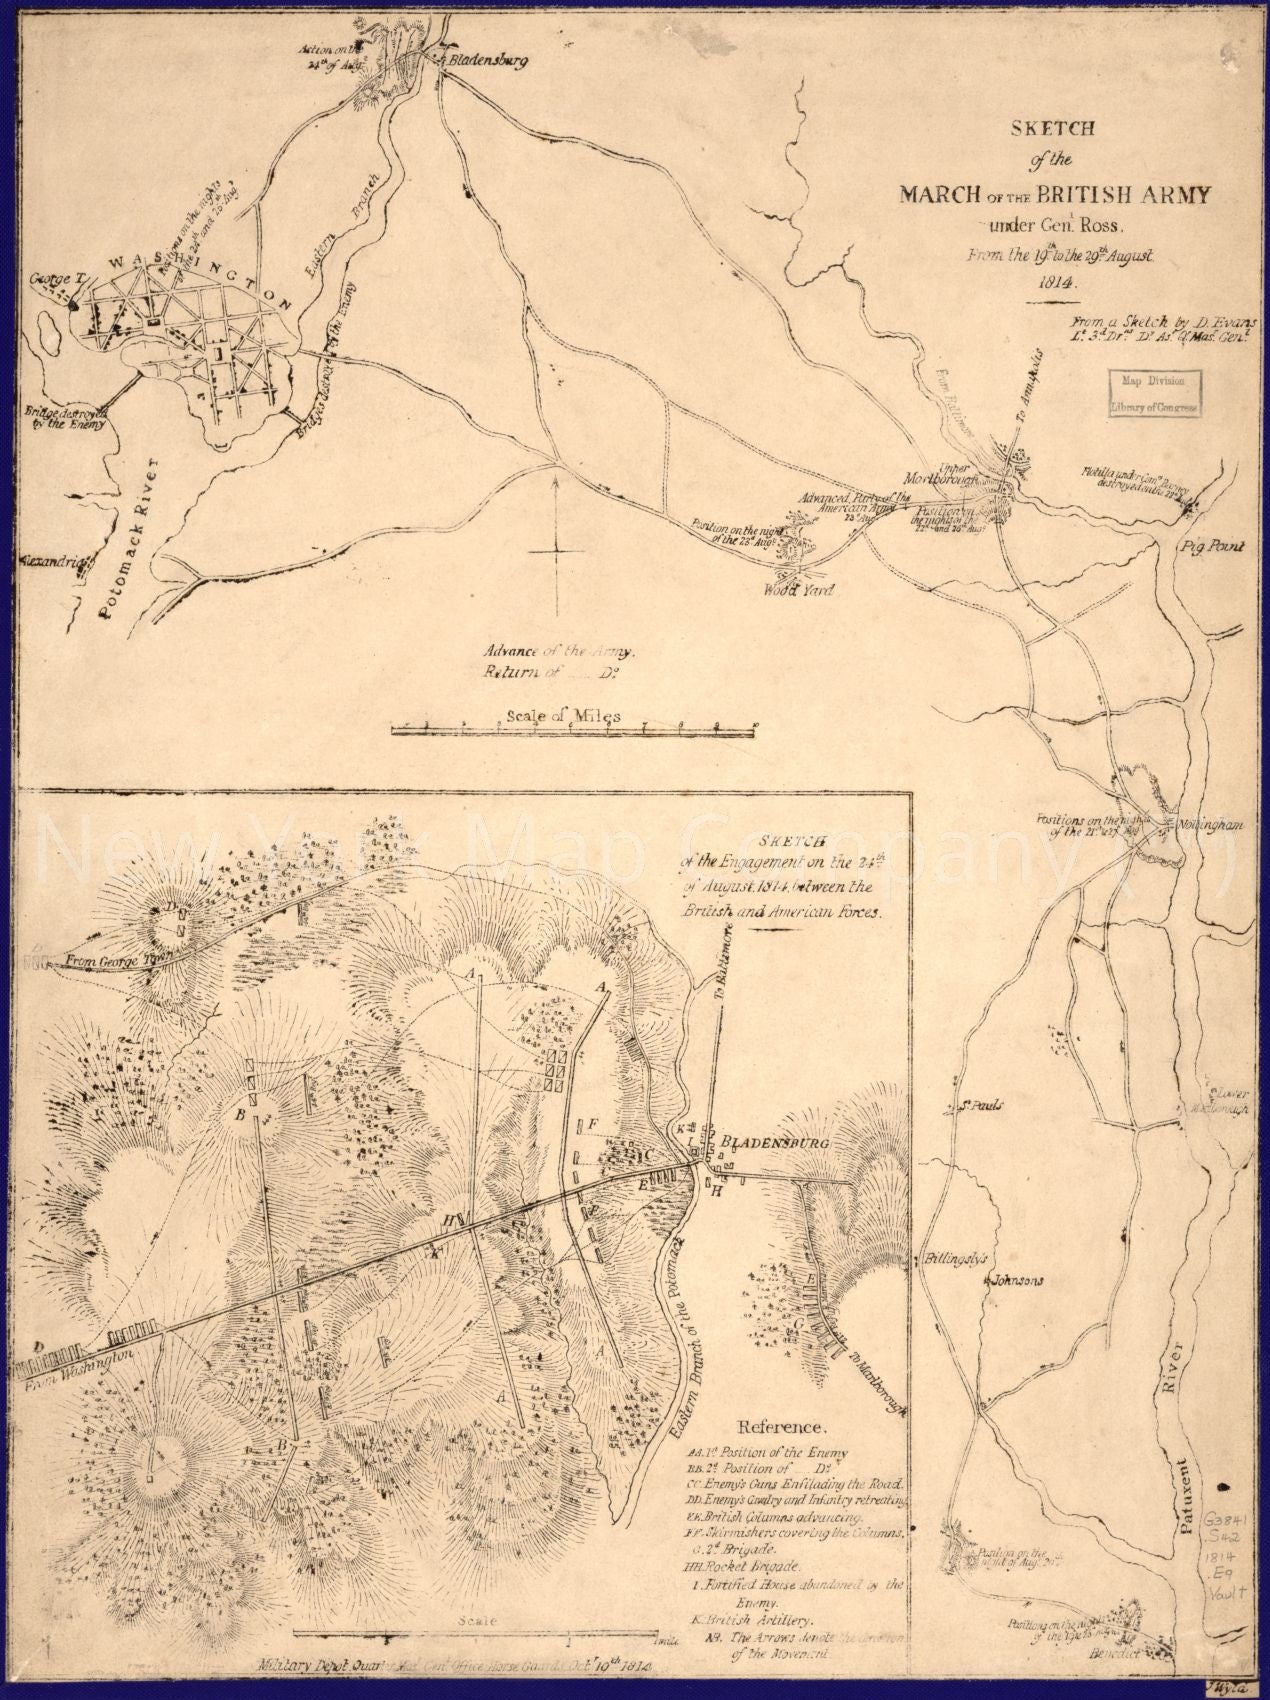 1814 map Sketch of the march of the British Army under Gen'l Ross from the 19th to the 29th August 1814: central Maryland between Benedict and Washington D.C. Sketch of the engagement on the 24th of August 1814 between the British and American forces. Ma